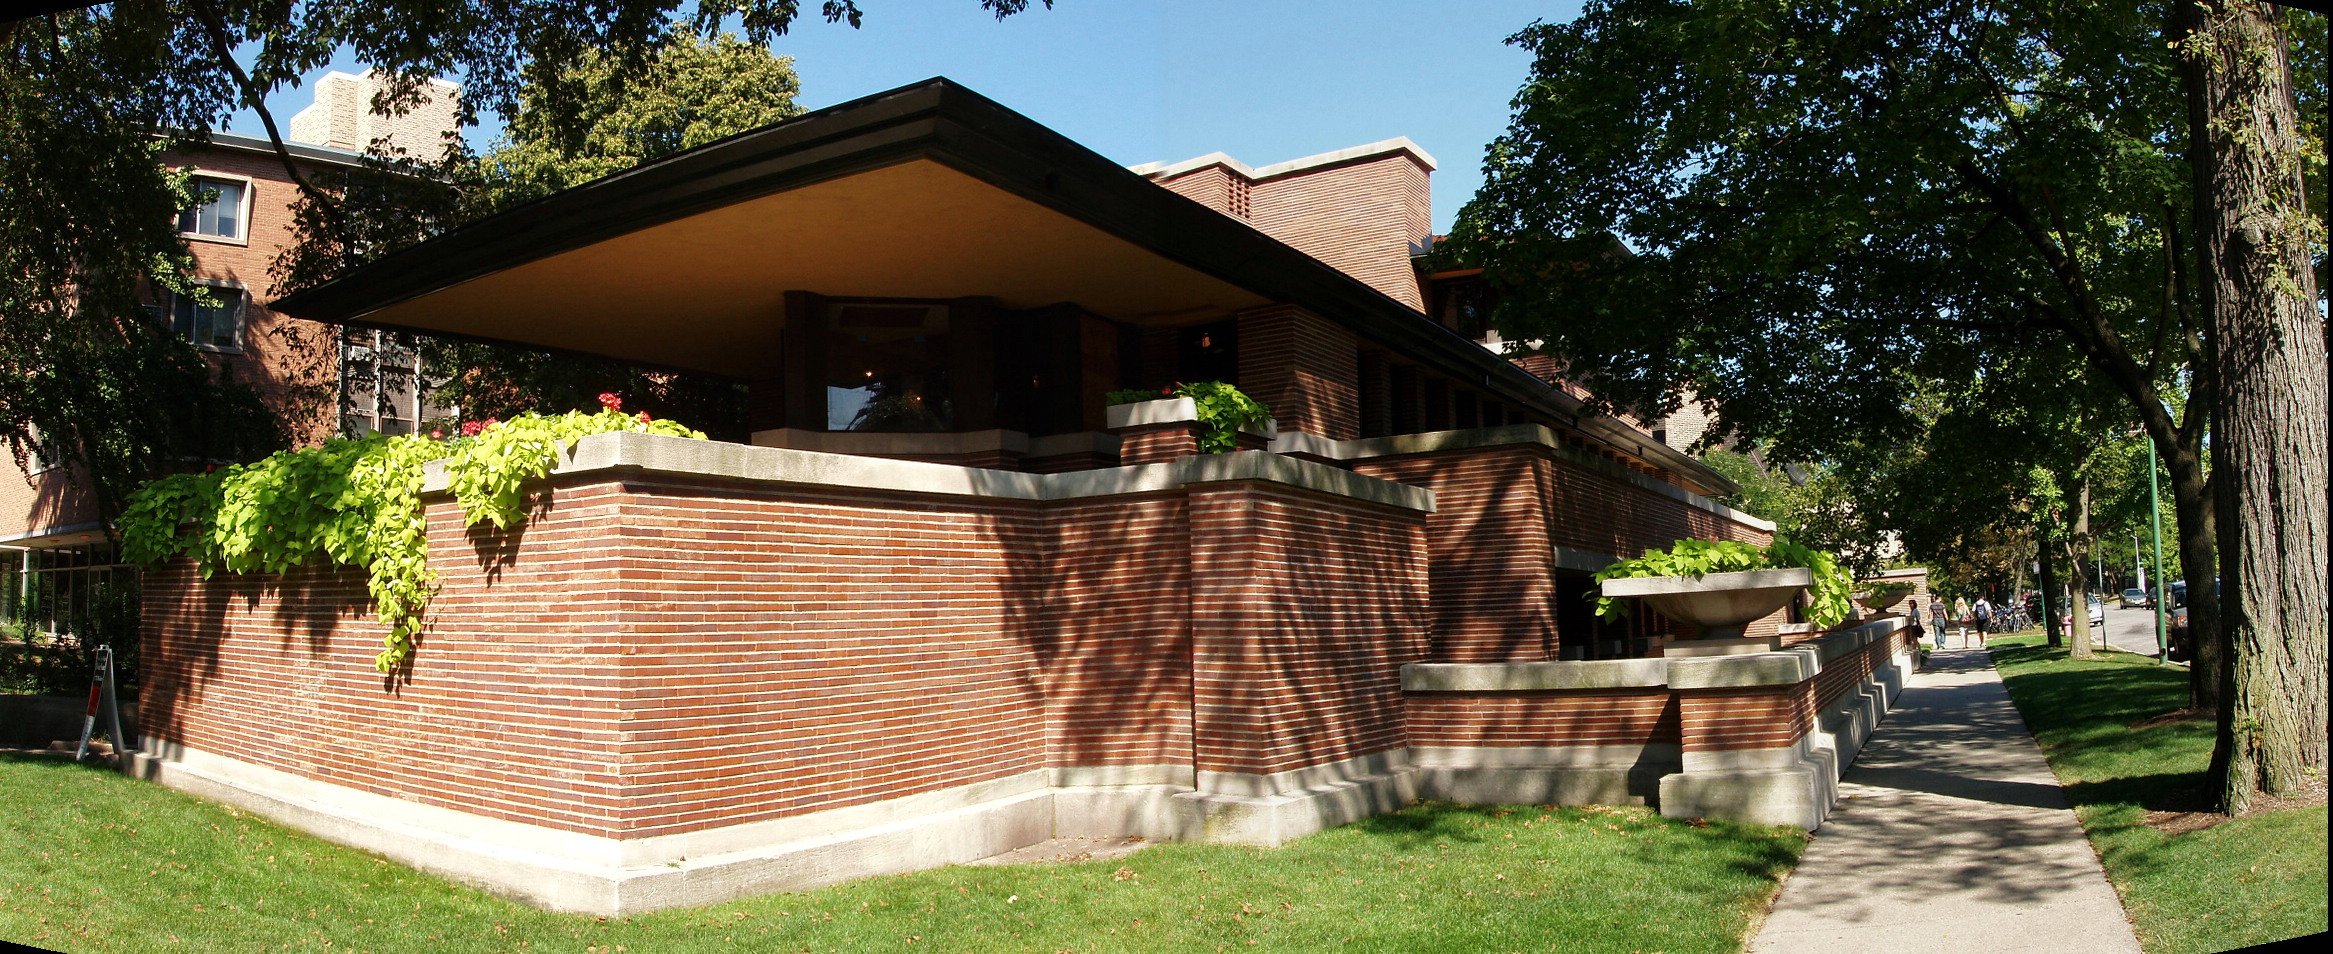 Image of Panormaic of Robie House